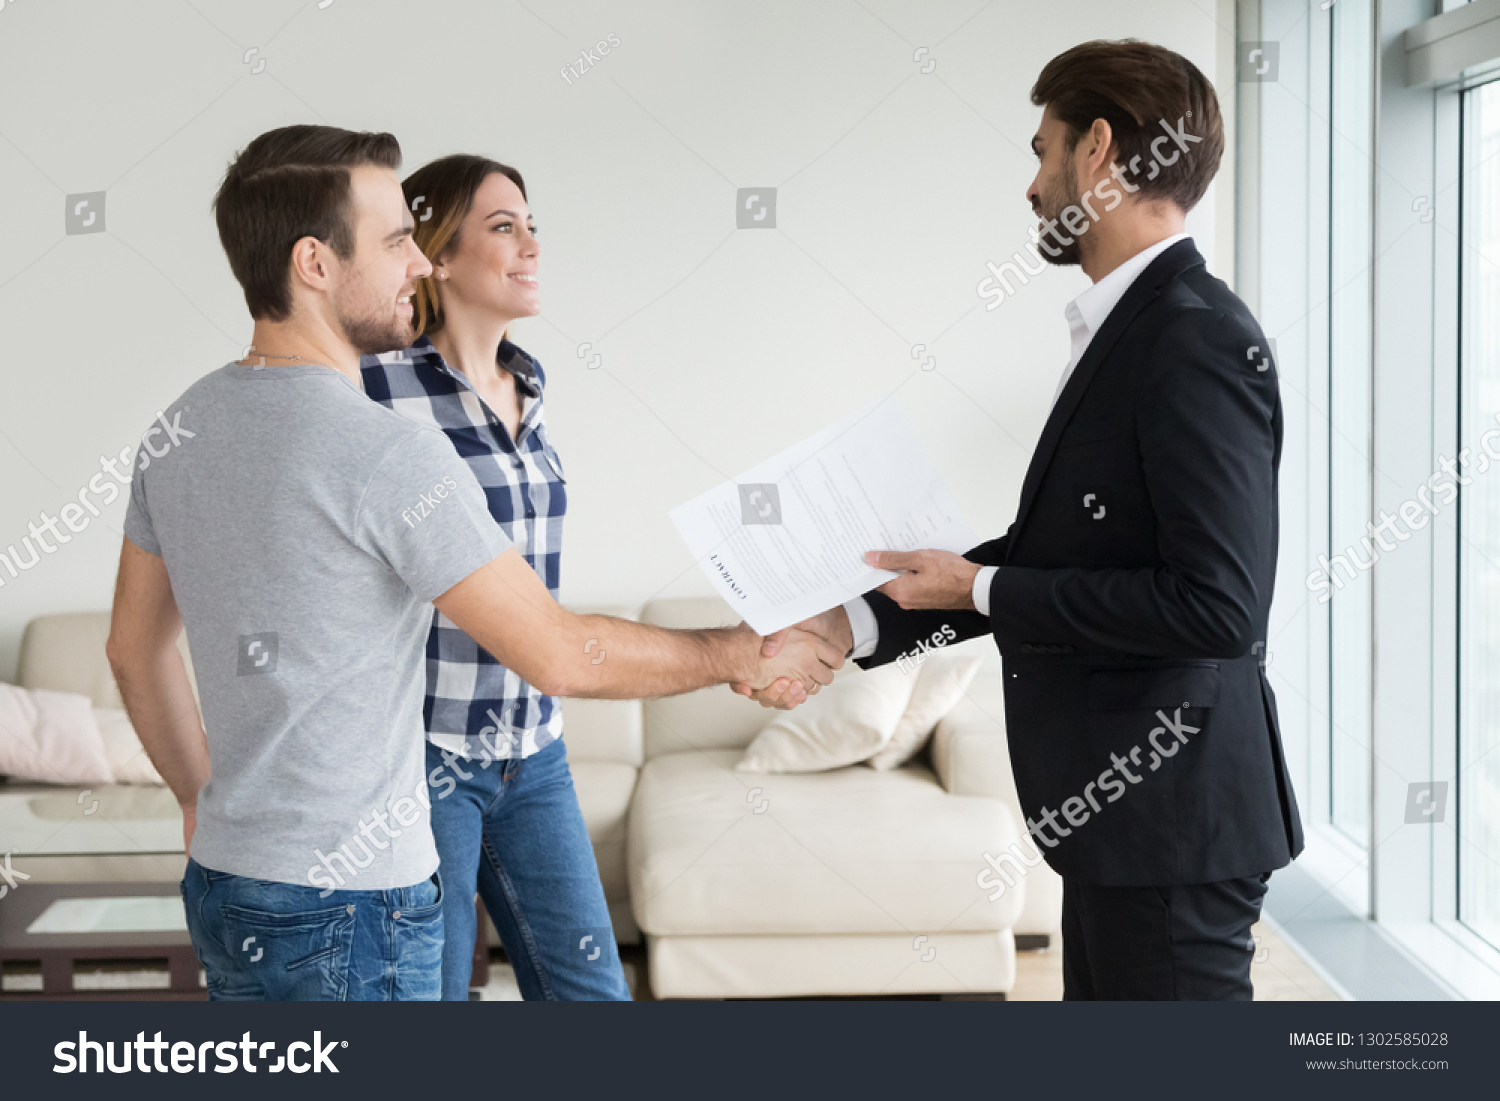 Realtor or landlord handshaking couple buyers tenants make real estate deal holding rental agreement or sale purchase contract, agent and clients shake hands welcoming renters in new home apartment #1302585028